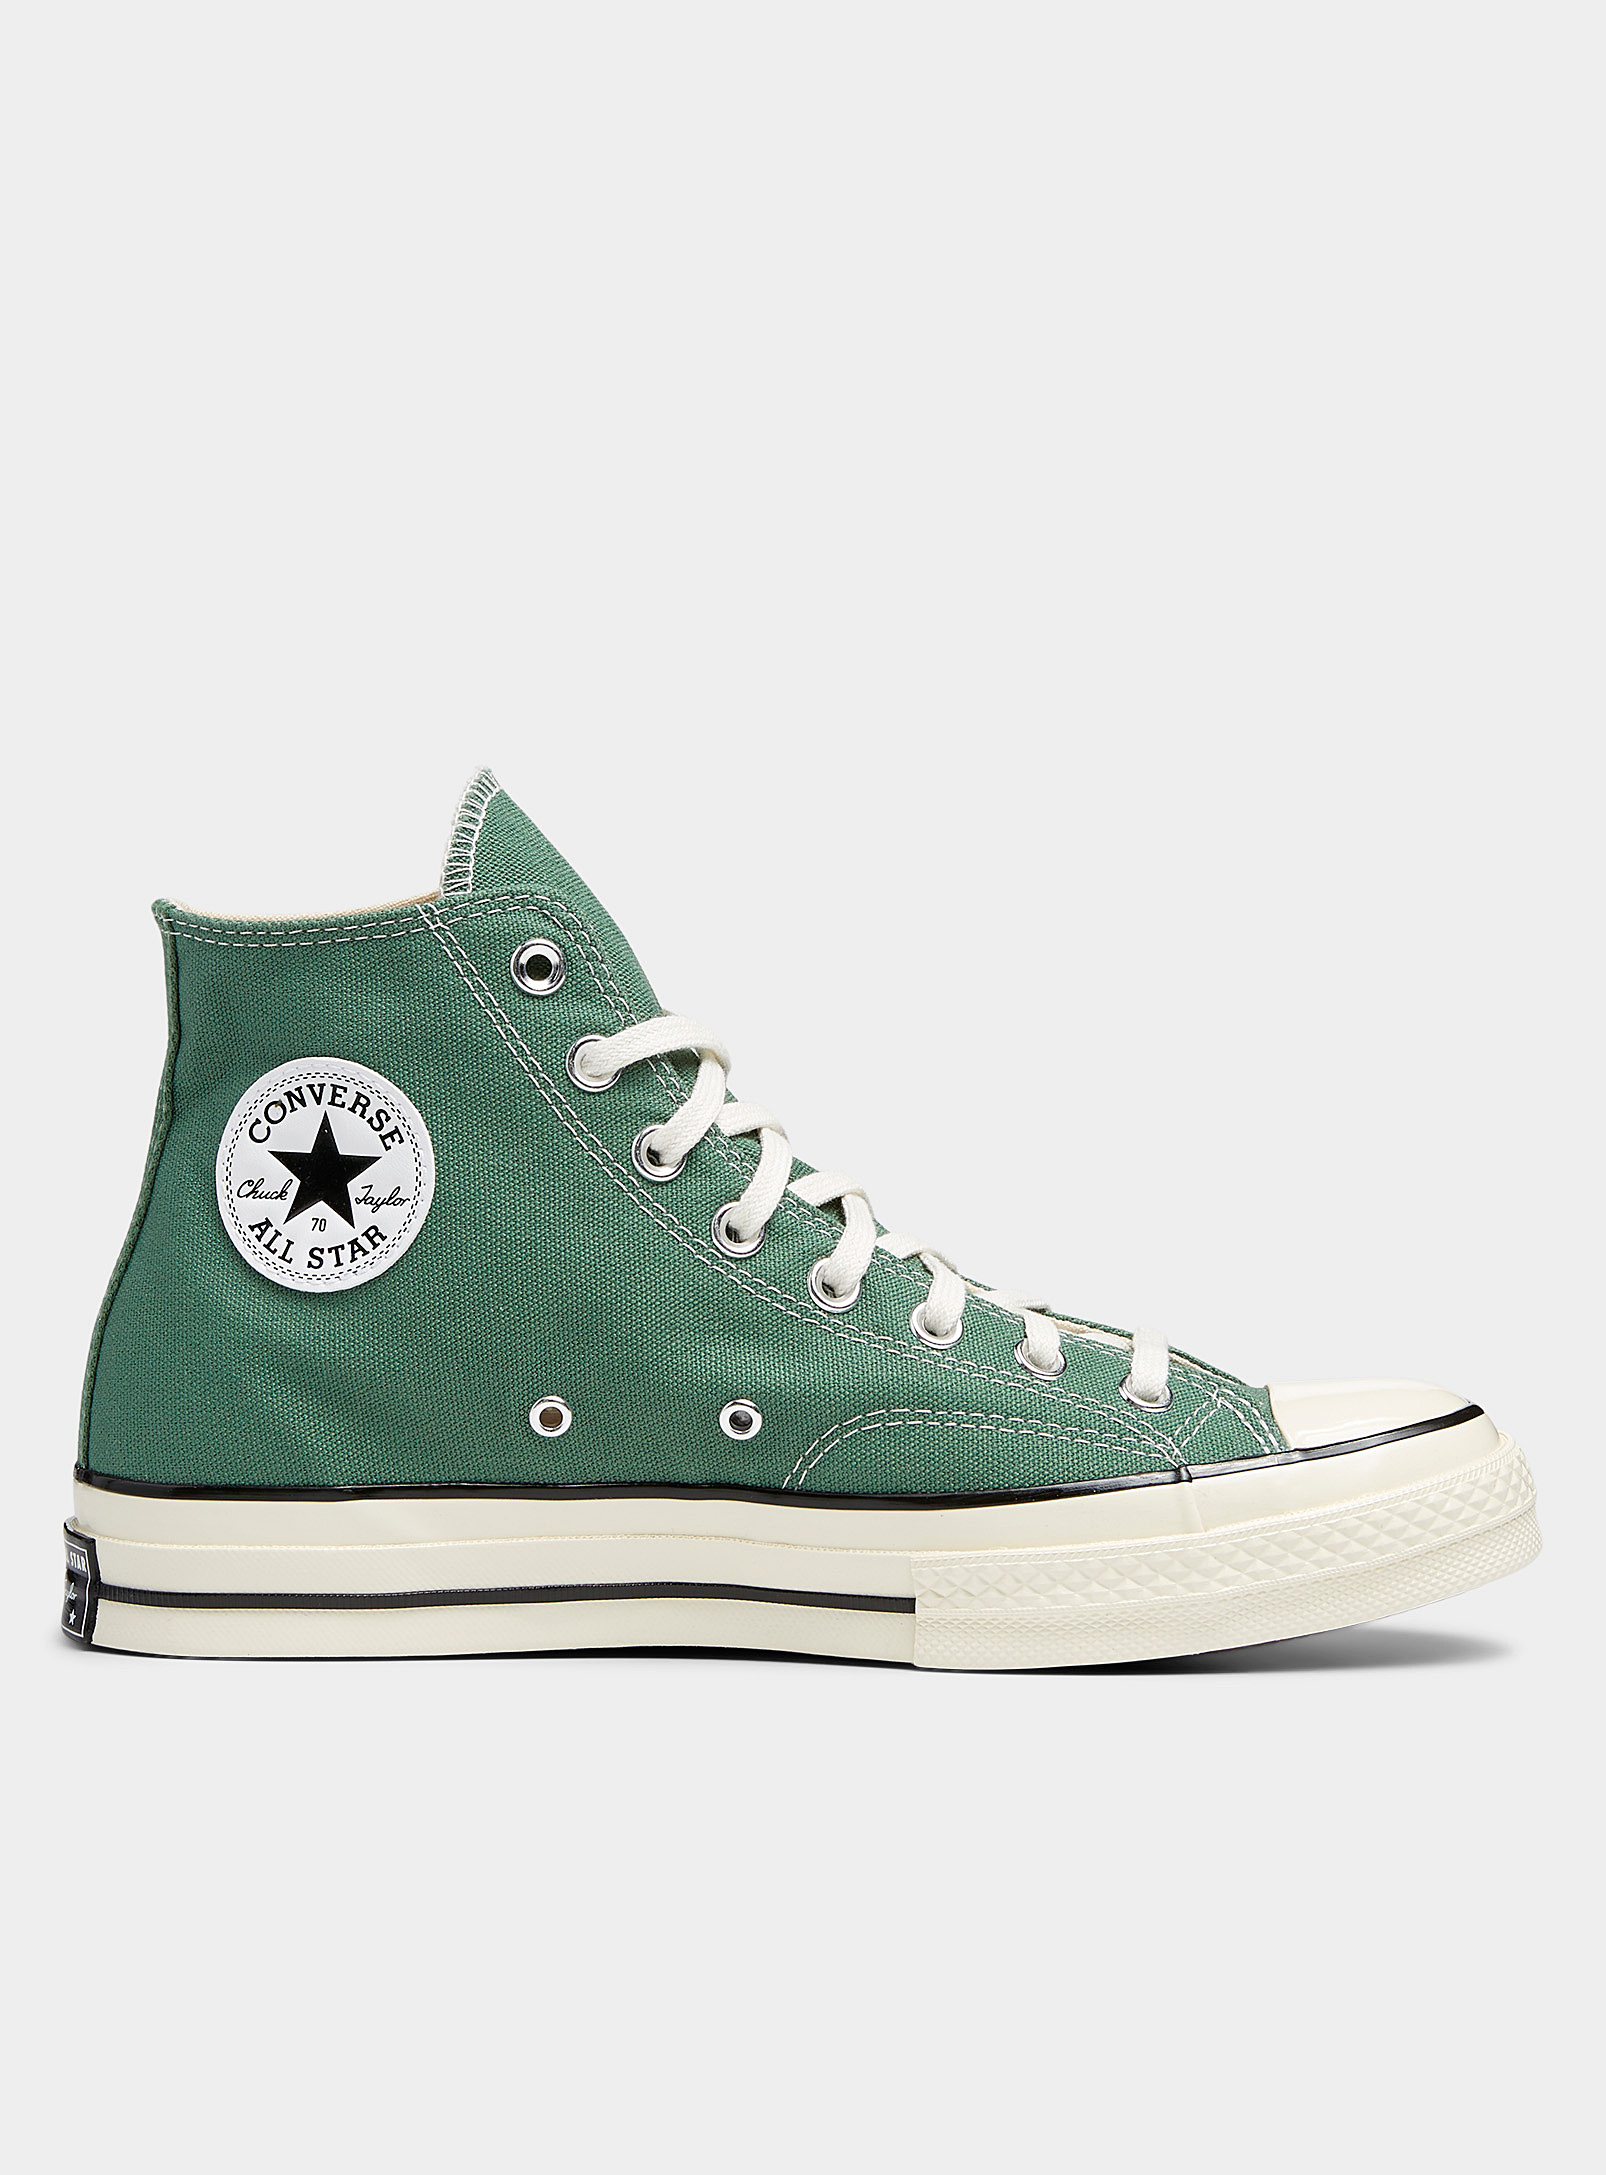 Converse Chuck 70 High Top Pigmented Sneakers Men In Emerald/kelly Green